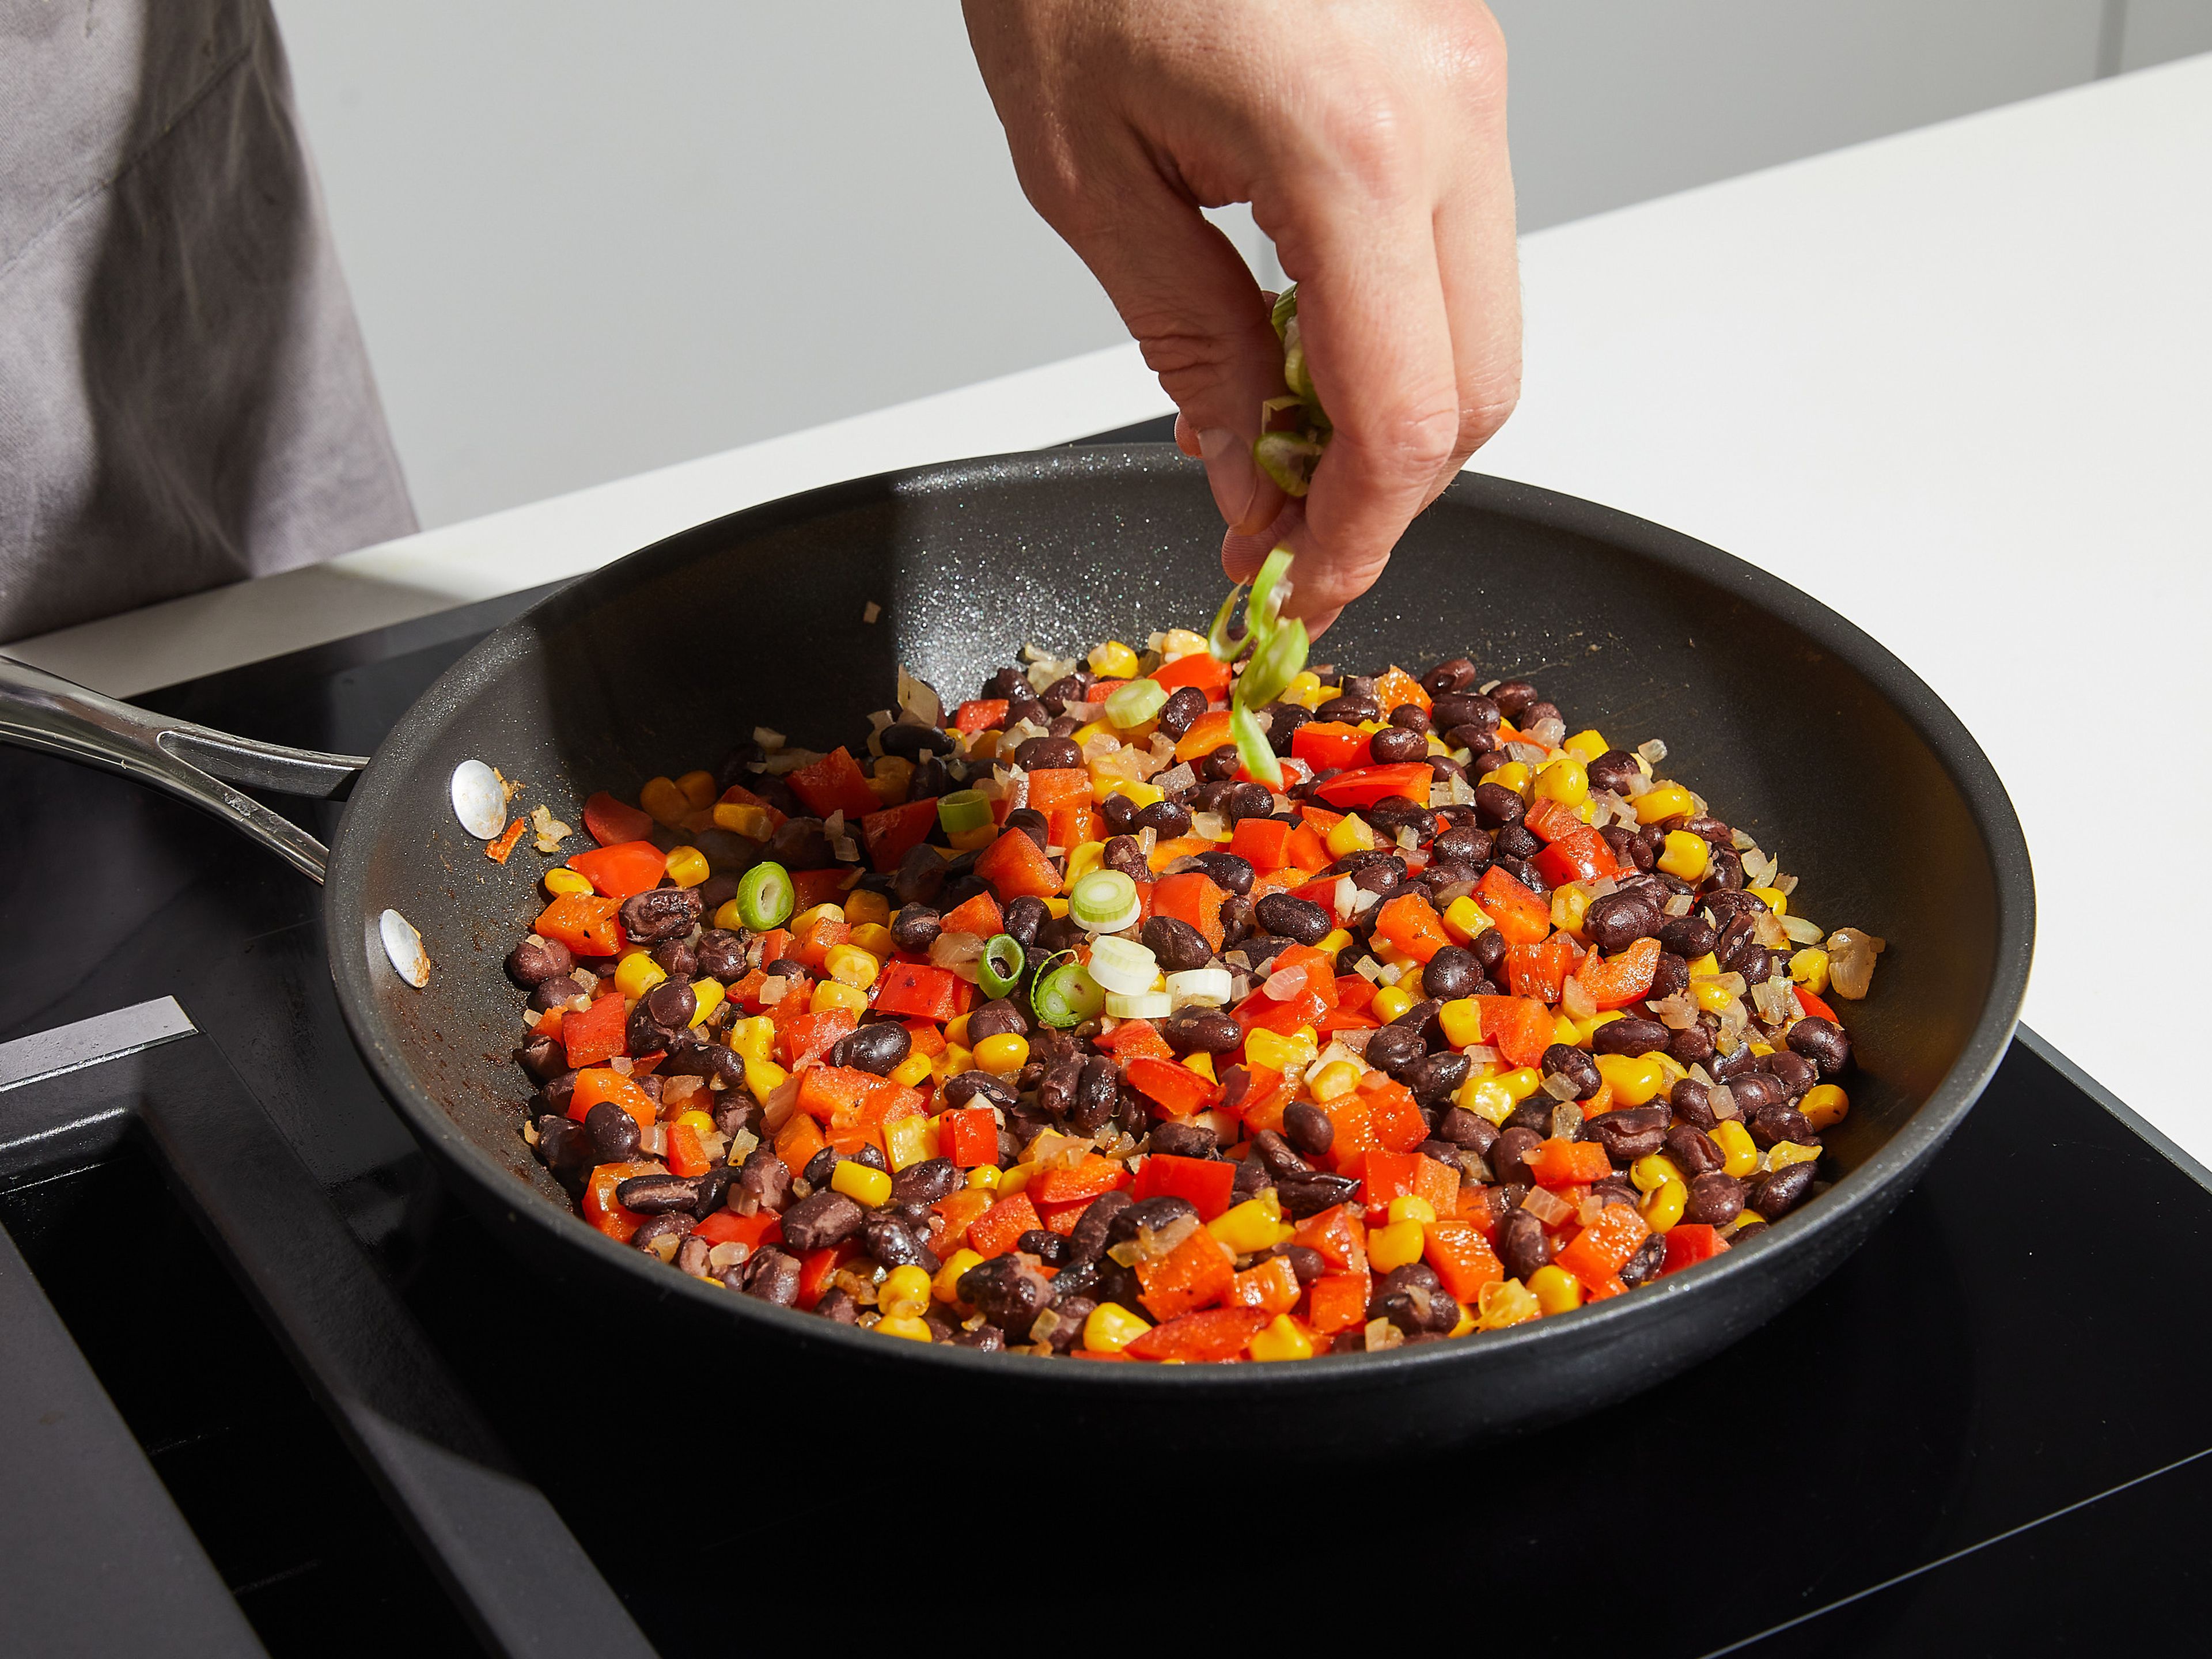 In a frying pan, heat some oil over medium heat. Fry onions approx. 1–2 min. until translucent, then add bell pepper, garlic, chili, black beans, and corn. Keep frying on medium heat for an additional 3–4 min., stirring occasionally until well combined. Remove from heat and add the white part of the chopped scallions.